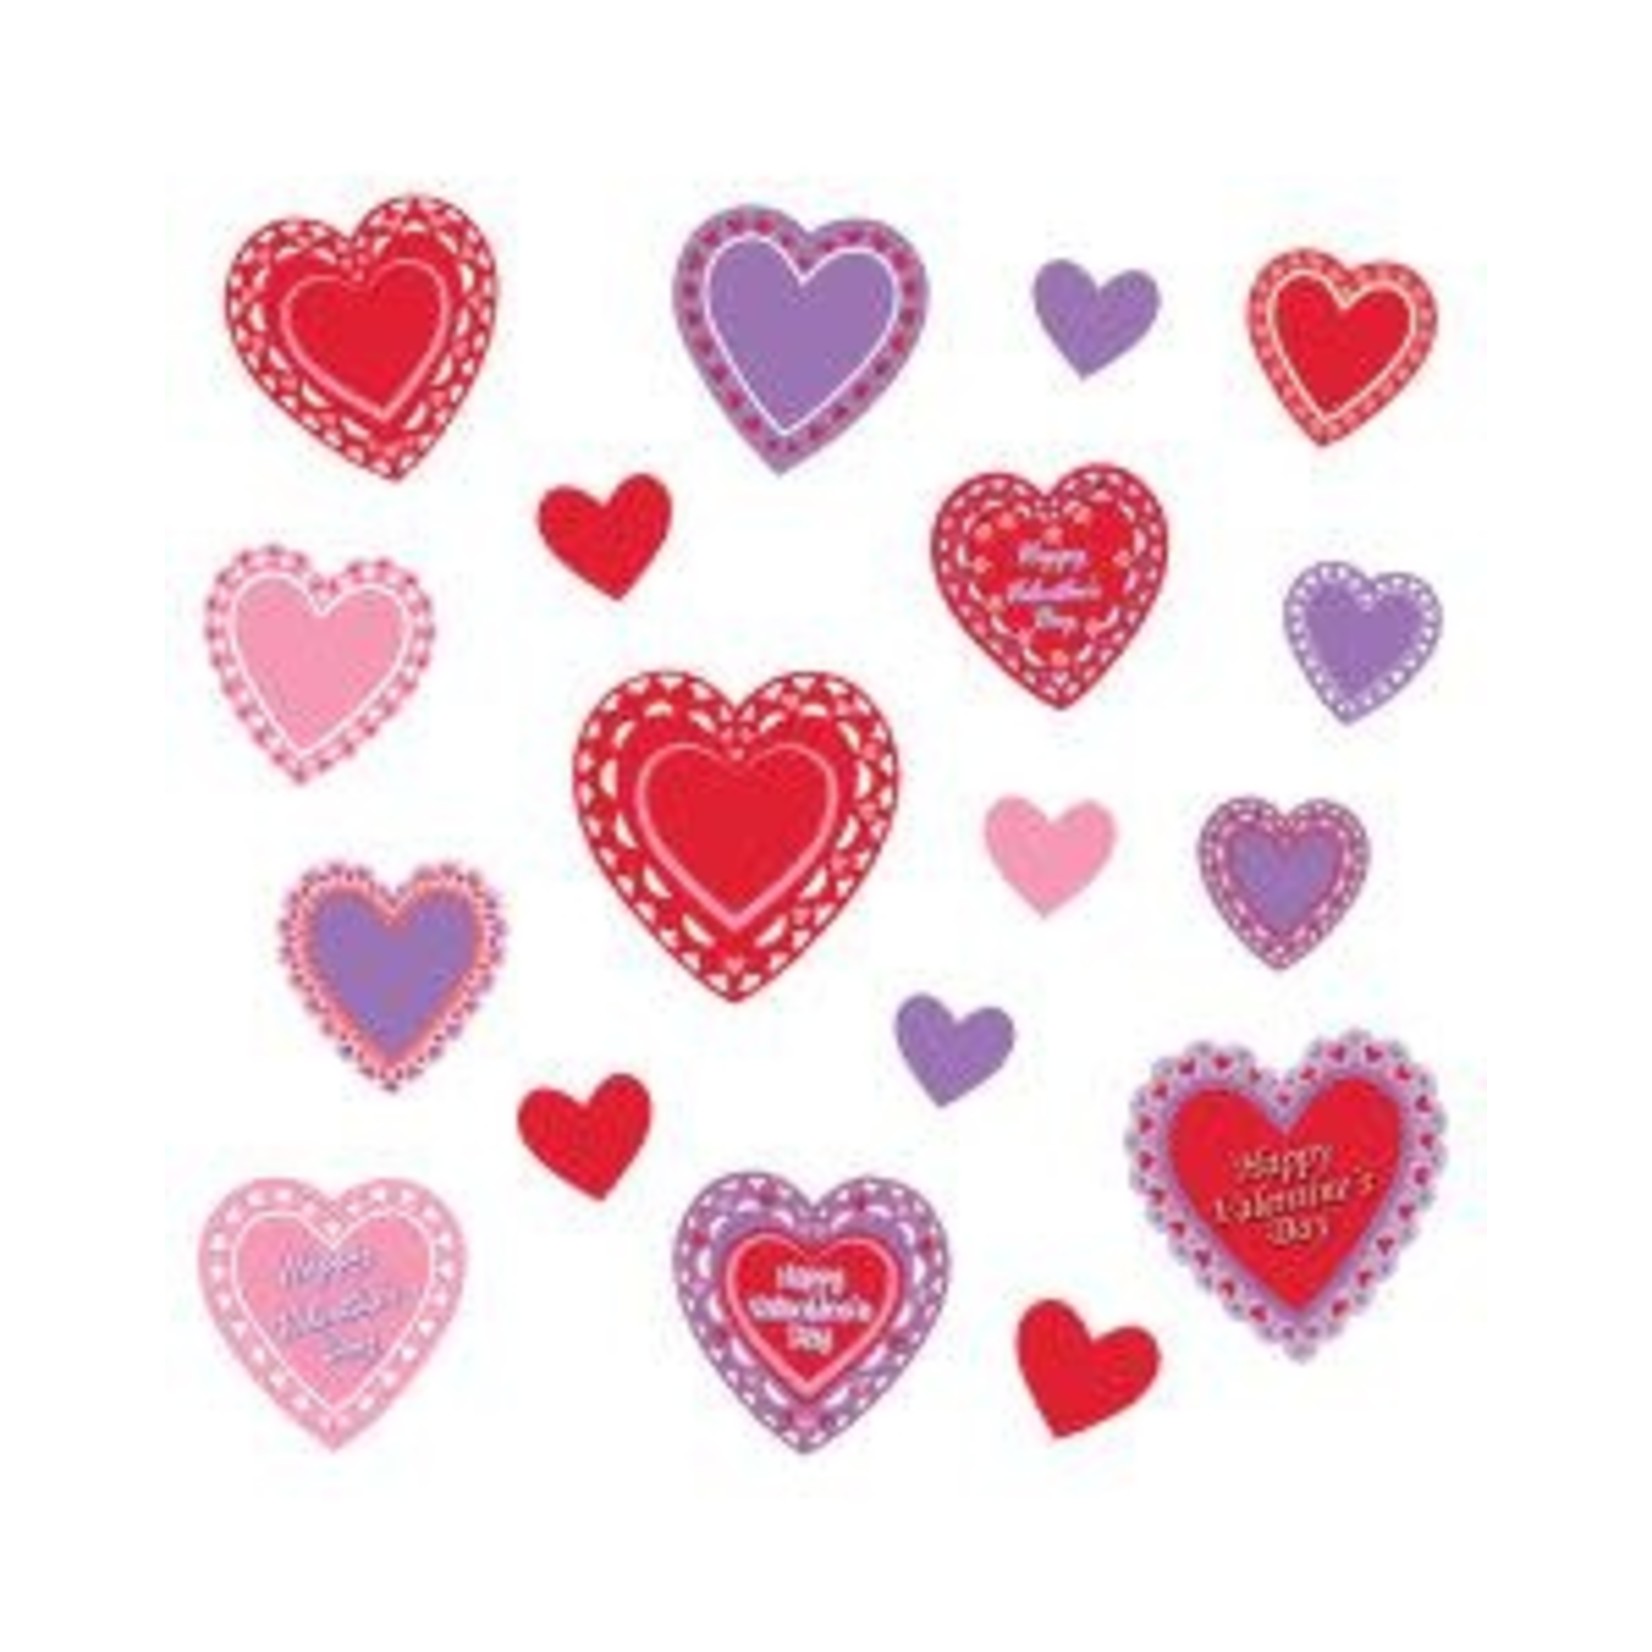 Beistle Valentine's Day Heart Stickers - 2 sheets